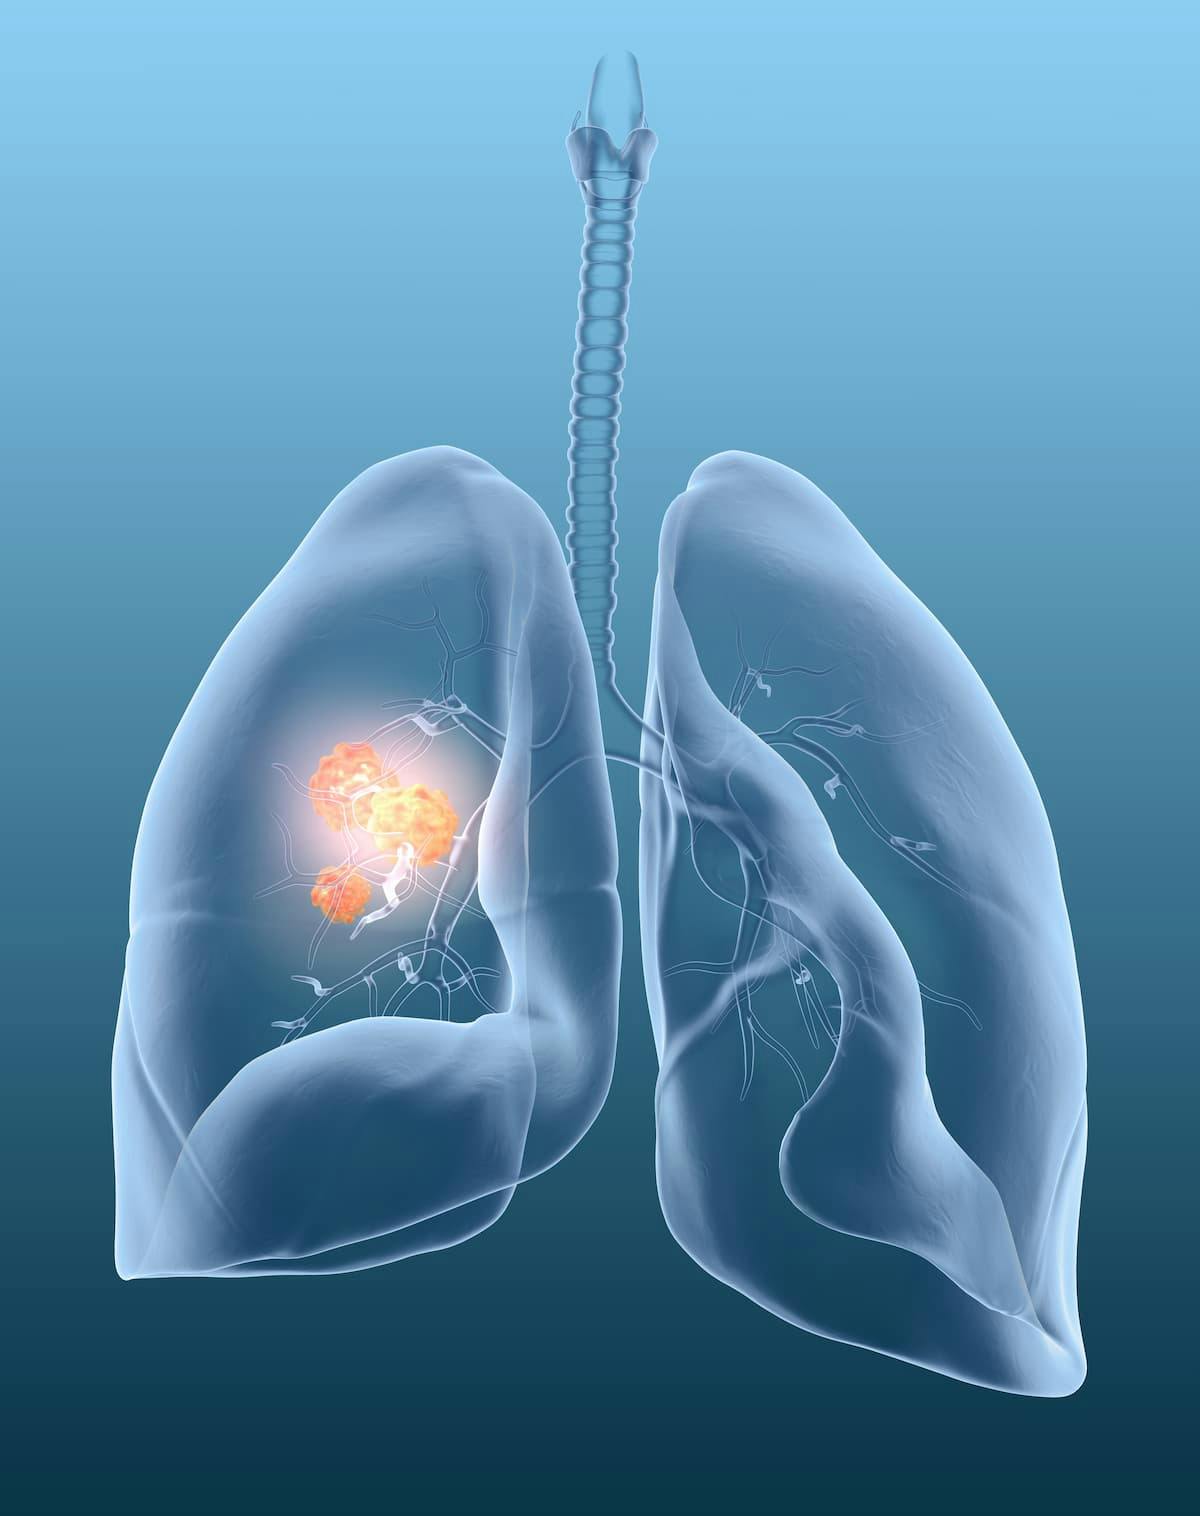 Sexual Dysfunction Poses Significant Issue for Women With Lung Cancer